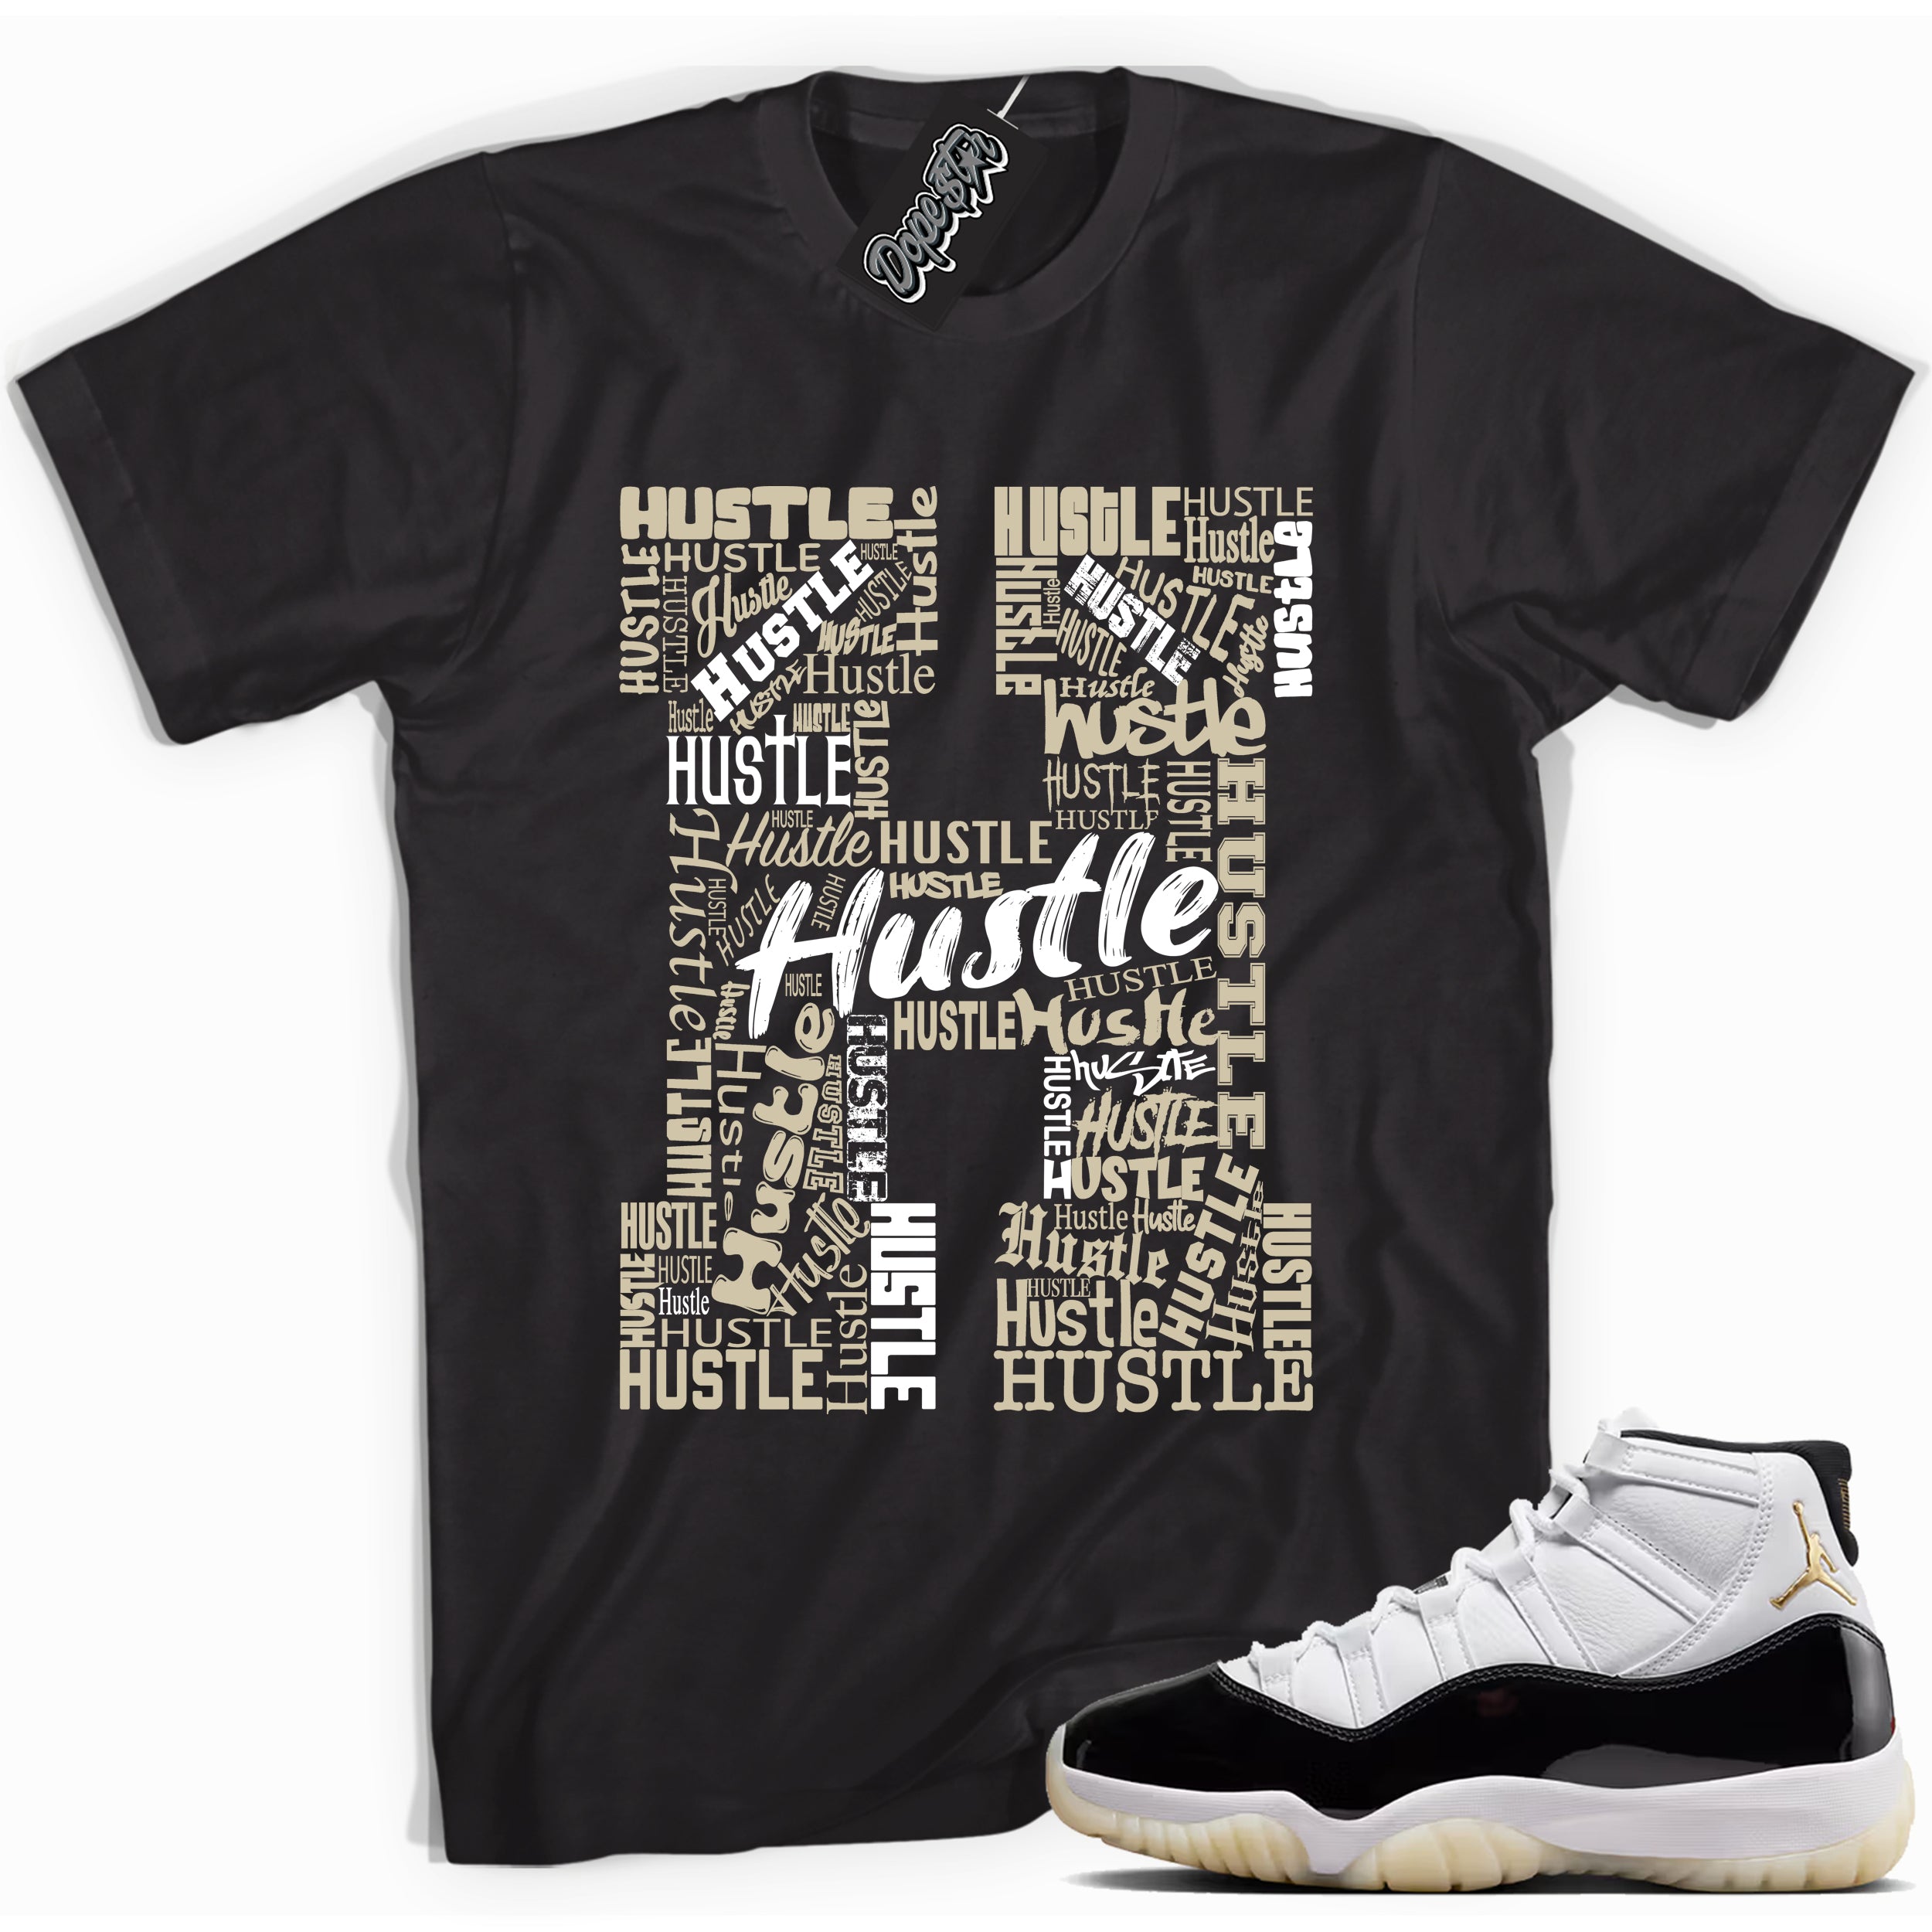 Cool Black graphic tee with “ Hustle H ” print, that perfectly matches AIR JORDAN 11 GRATITUDE  sneakers 